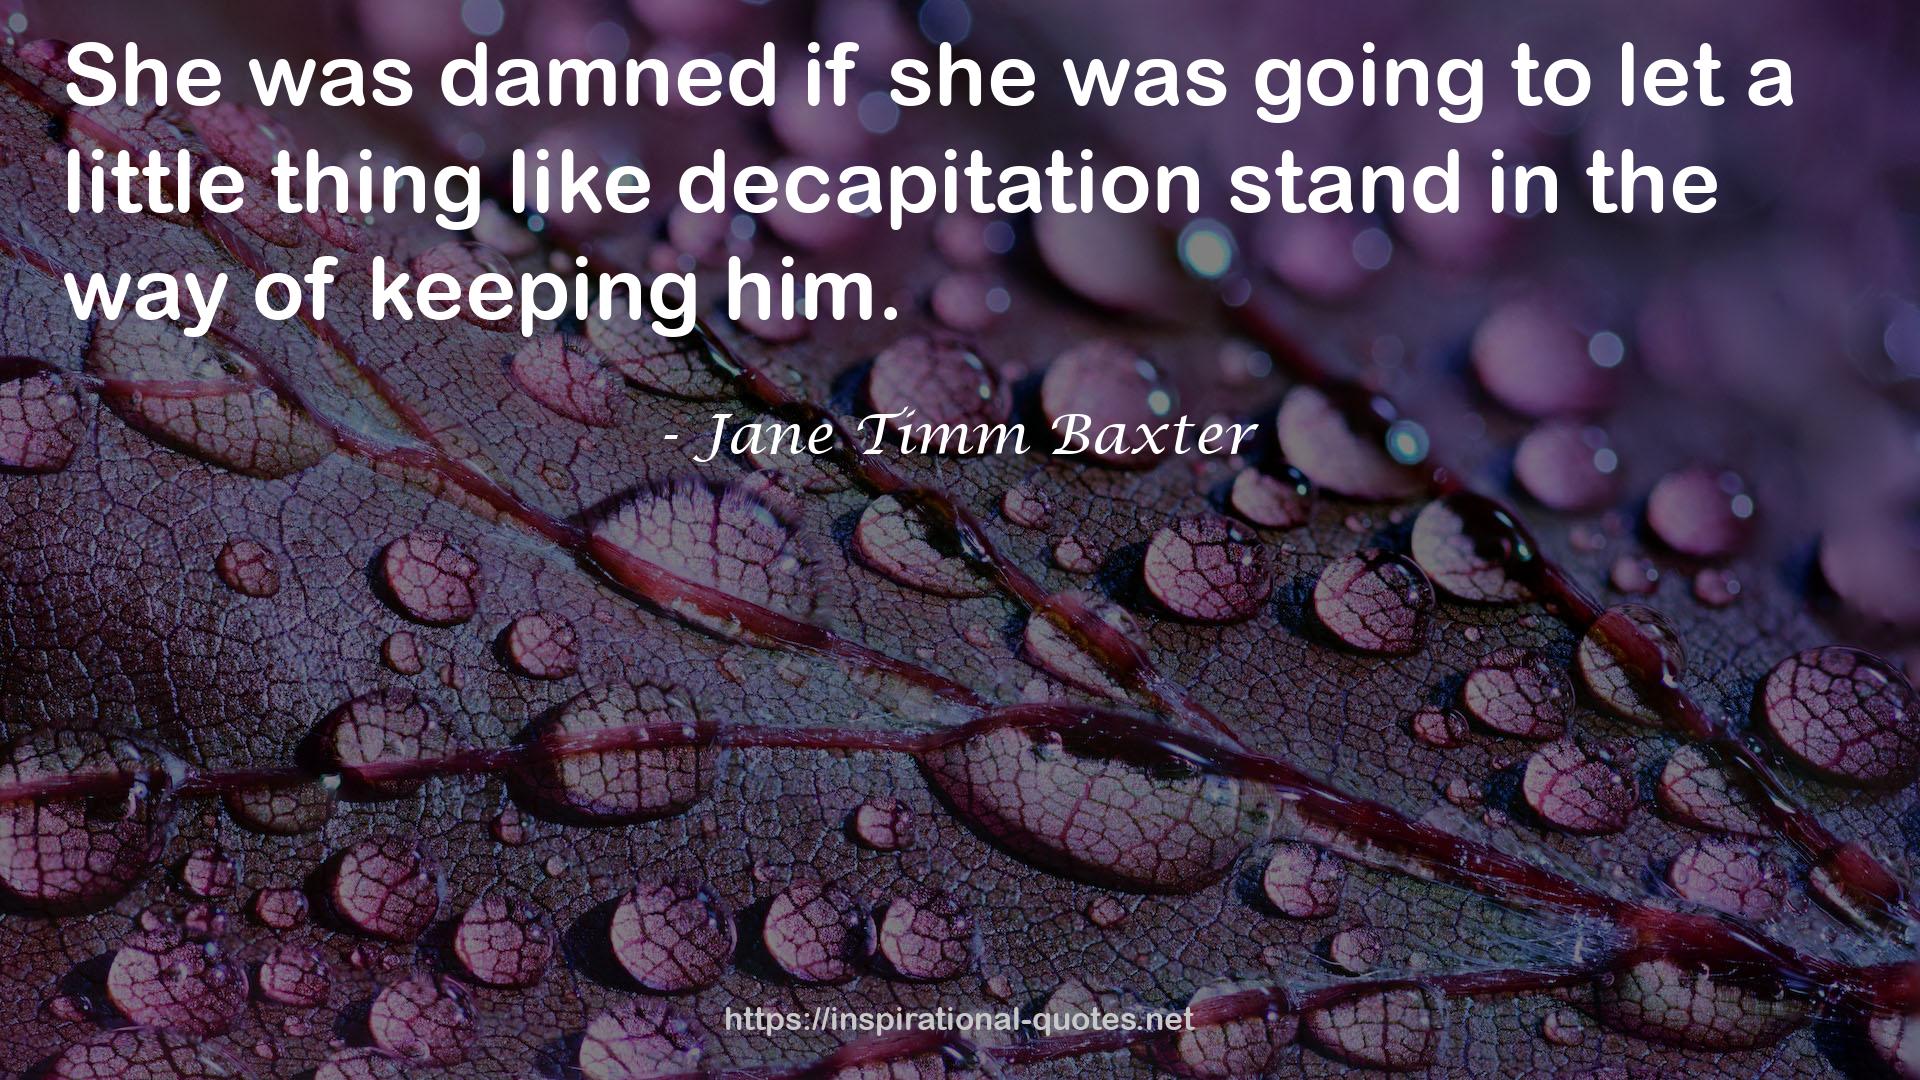 Jane Timm Baxter QUOTES